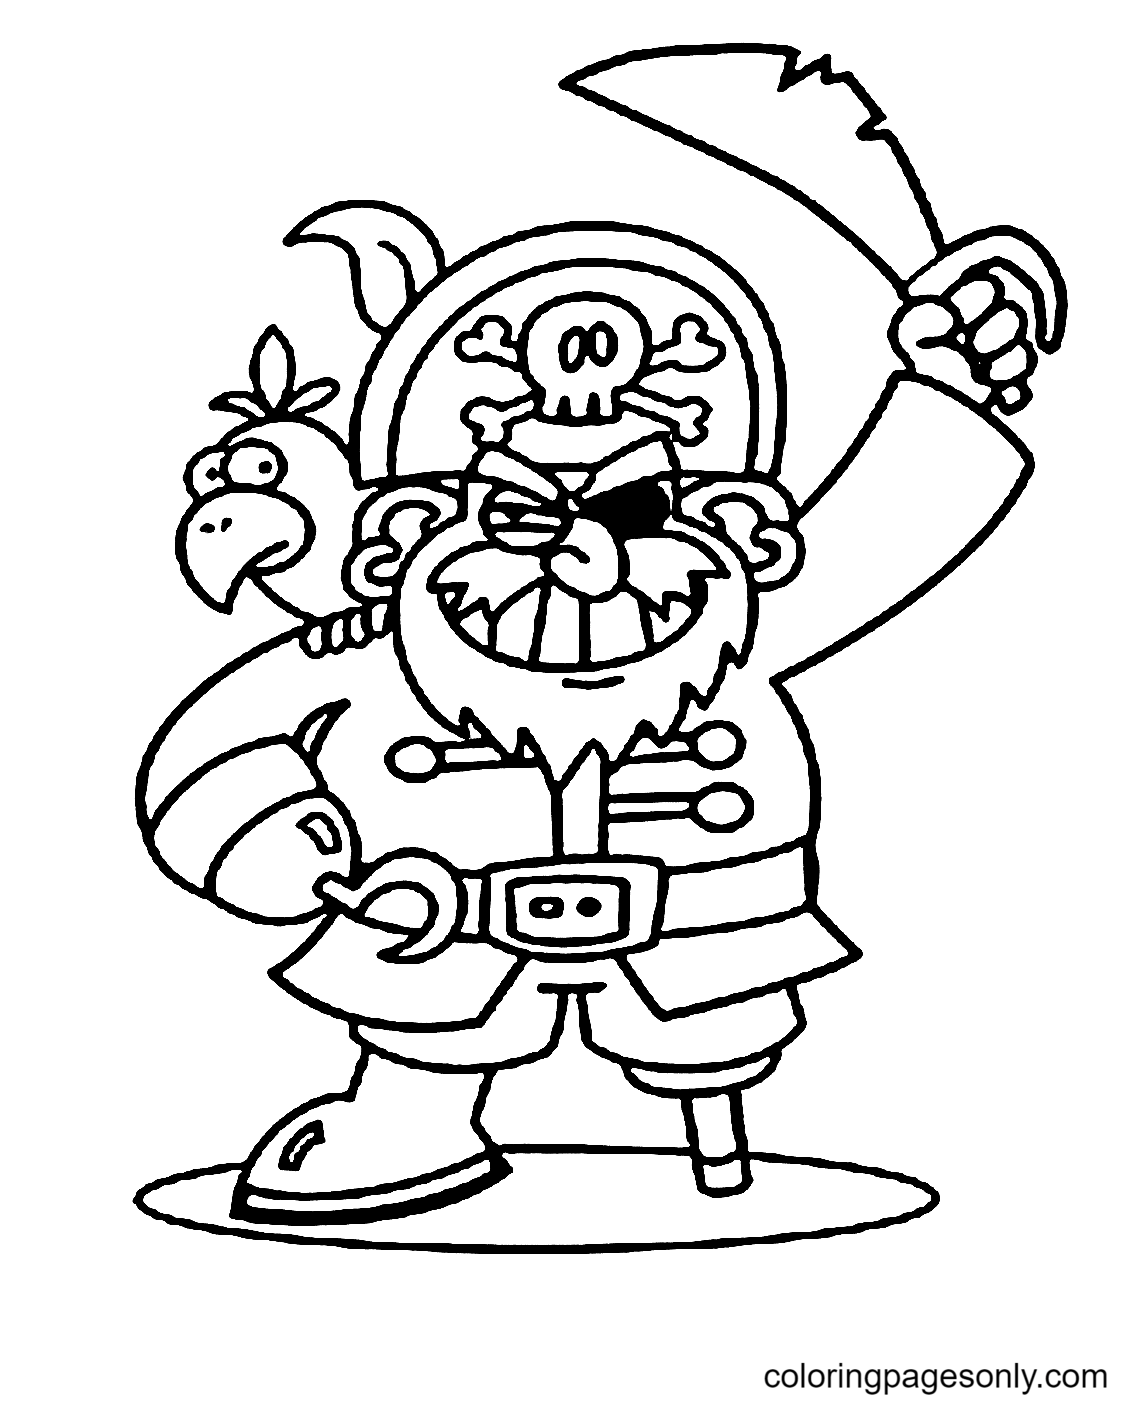 davy-jones-pirate-coloring-sheet-pirate-coloring-pages-coloring